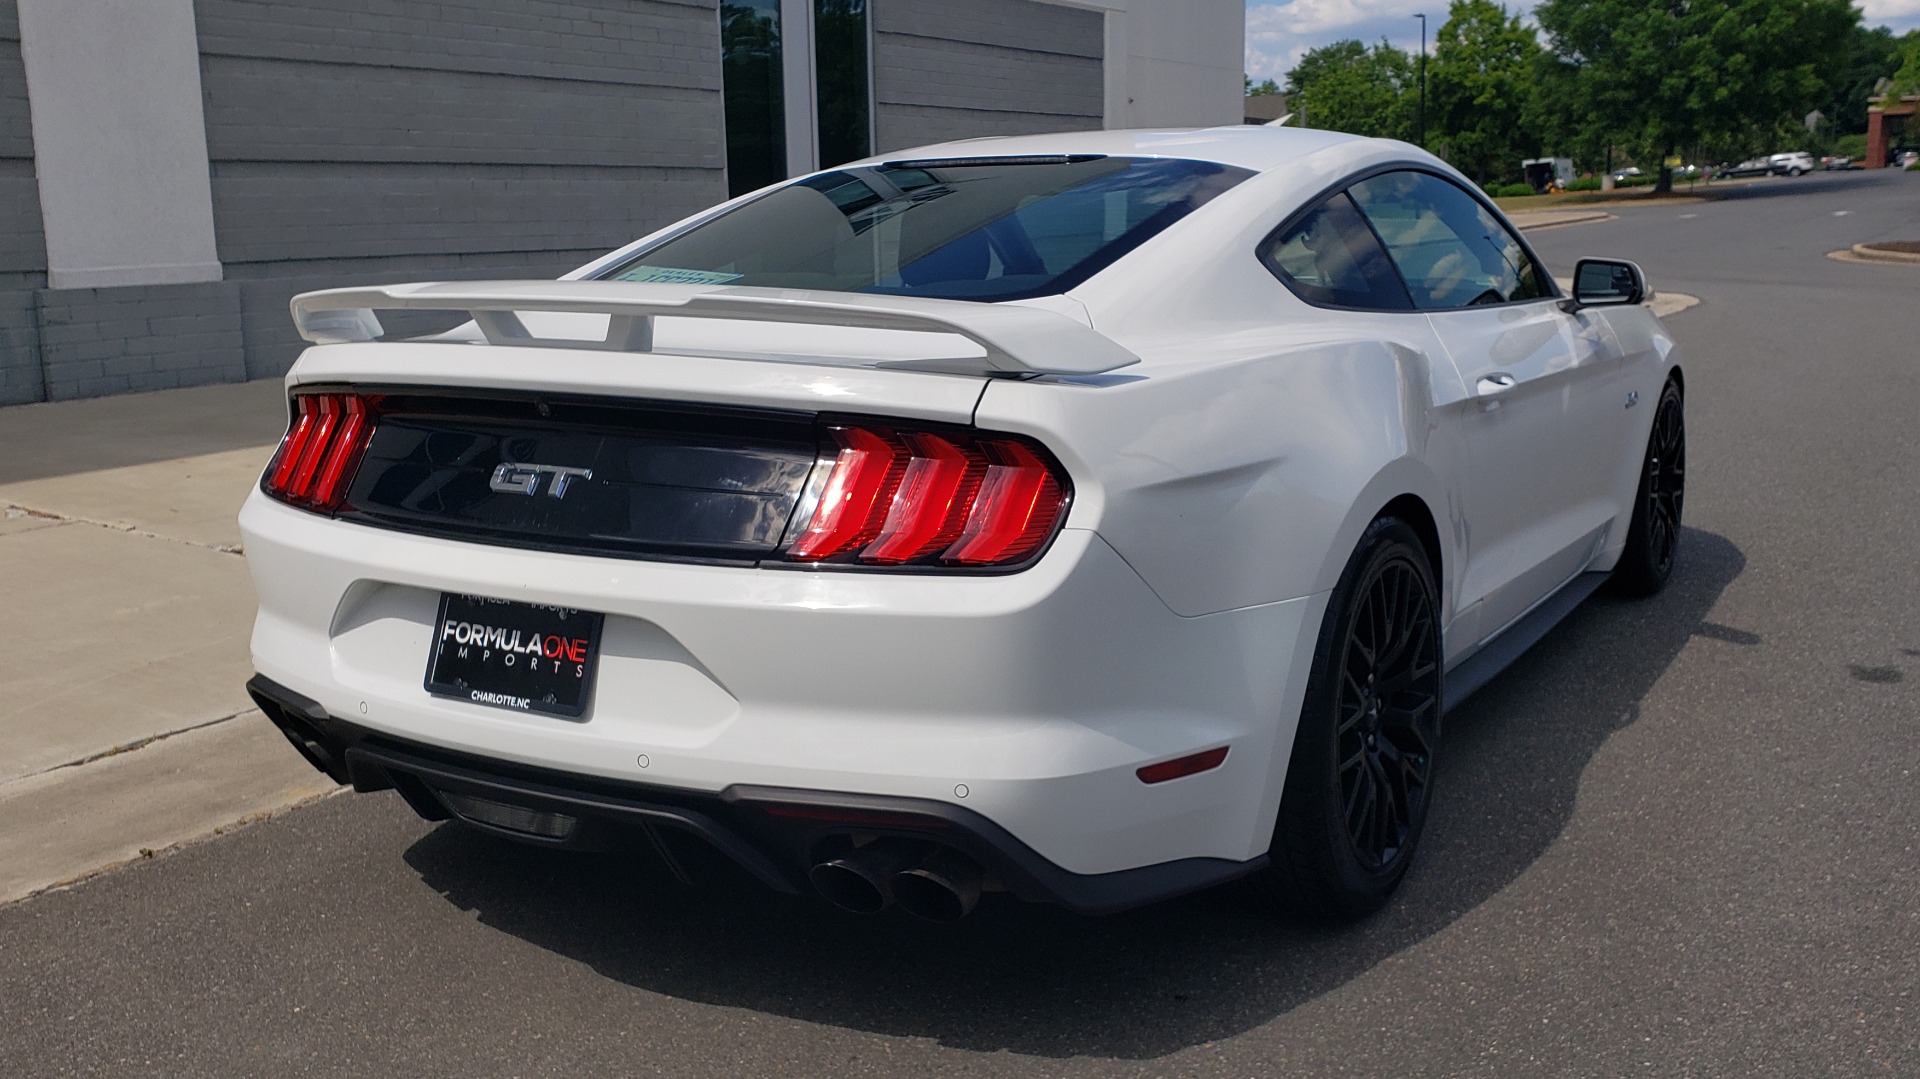 Used 2018 Ford MUSTANG GT COUPE / 5.0L V8 / AUTO / PERF PKG / REARVIEW / 19IN WHLS for sale Sold at Formula Imports in Charlotte NC 28227 2